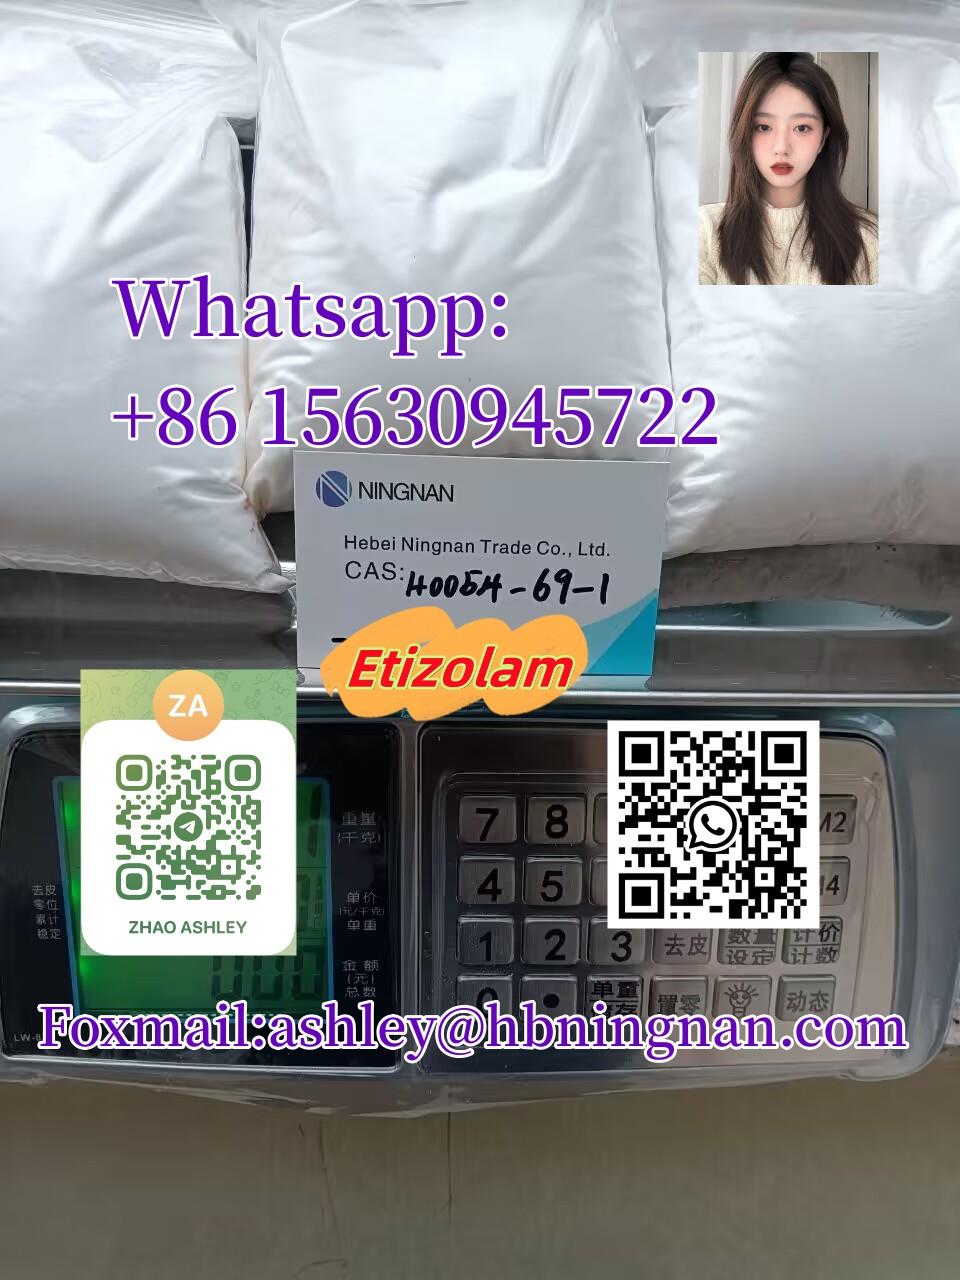 cas 40054-69-1   Etizolam High quality Organic Chemicals ,40054-69-1   Etizolam,ningnan,Hardware and Consumable/Chains